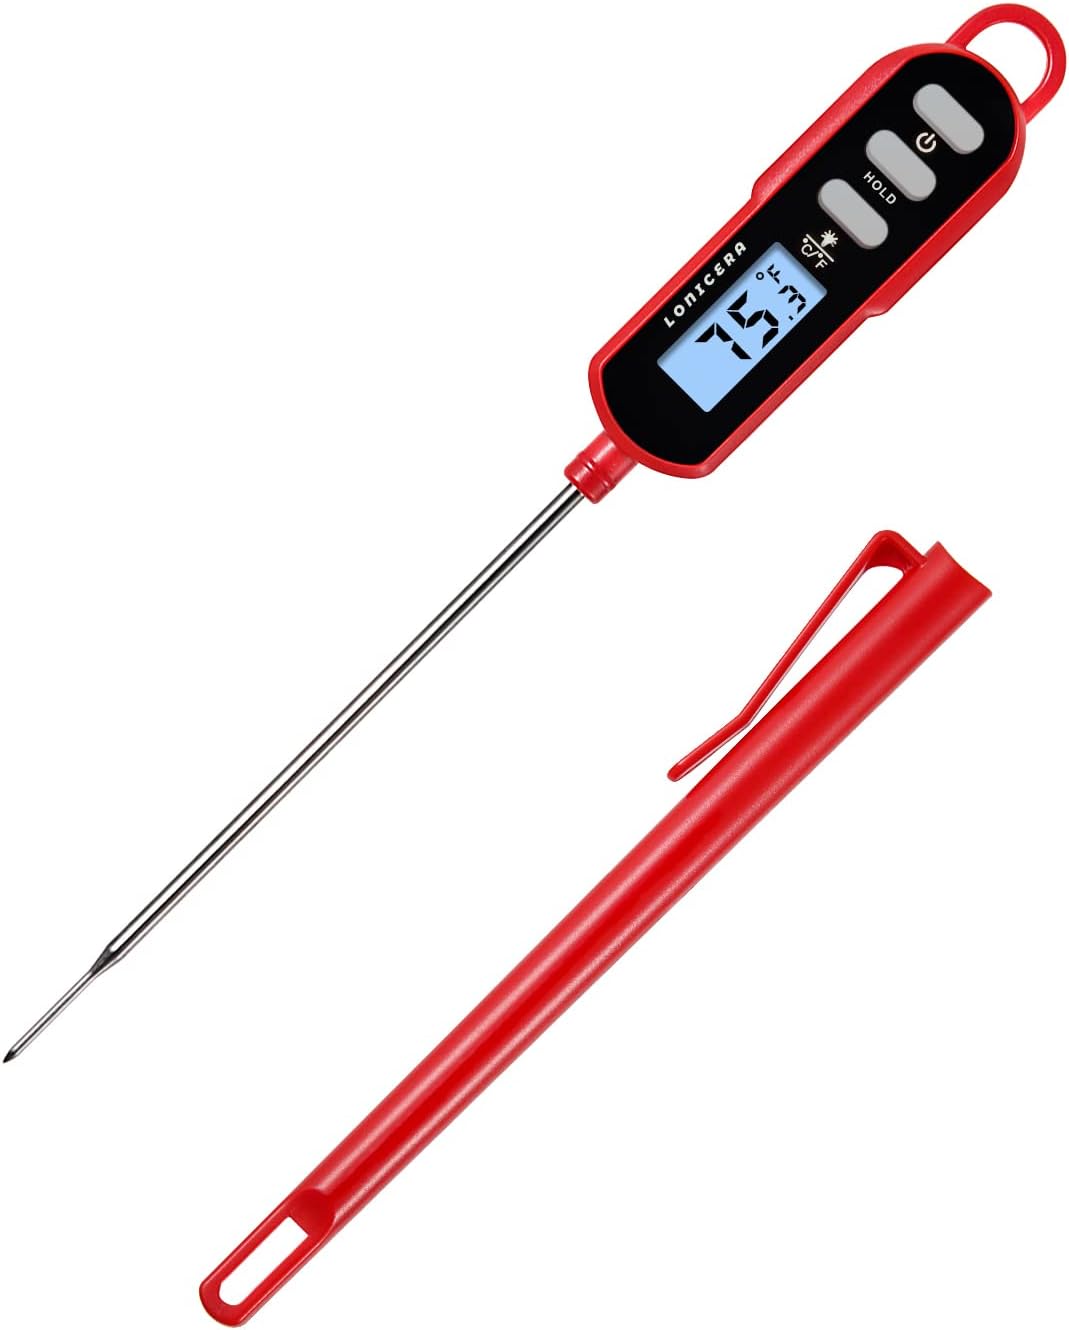 thermometer for baking bread review